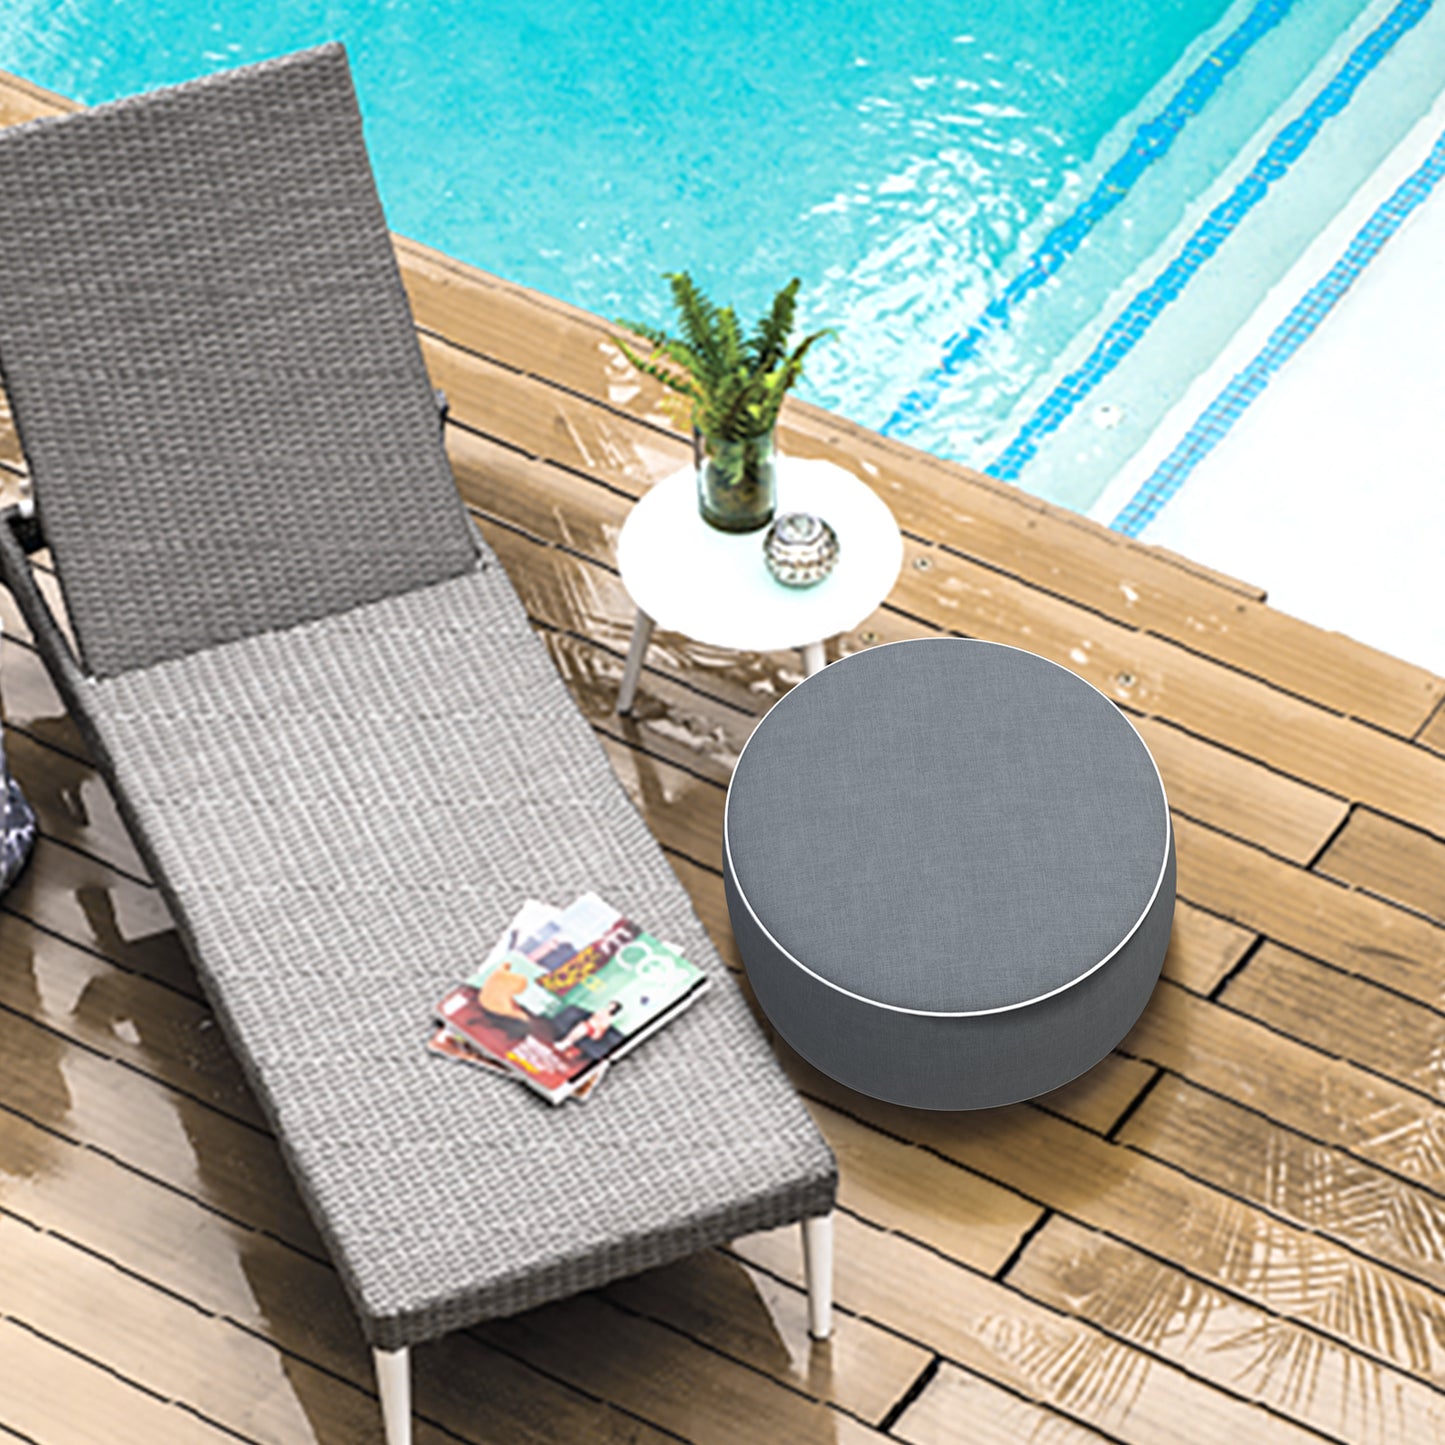 Melody Elephant Patio Inflatable Ottoman, 21x9 Inch Portable Stool Ottoman with Handle, Outdoor Round Footrest Stool for Garden Camping, Textured Gray